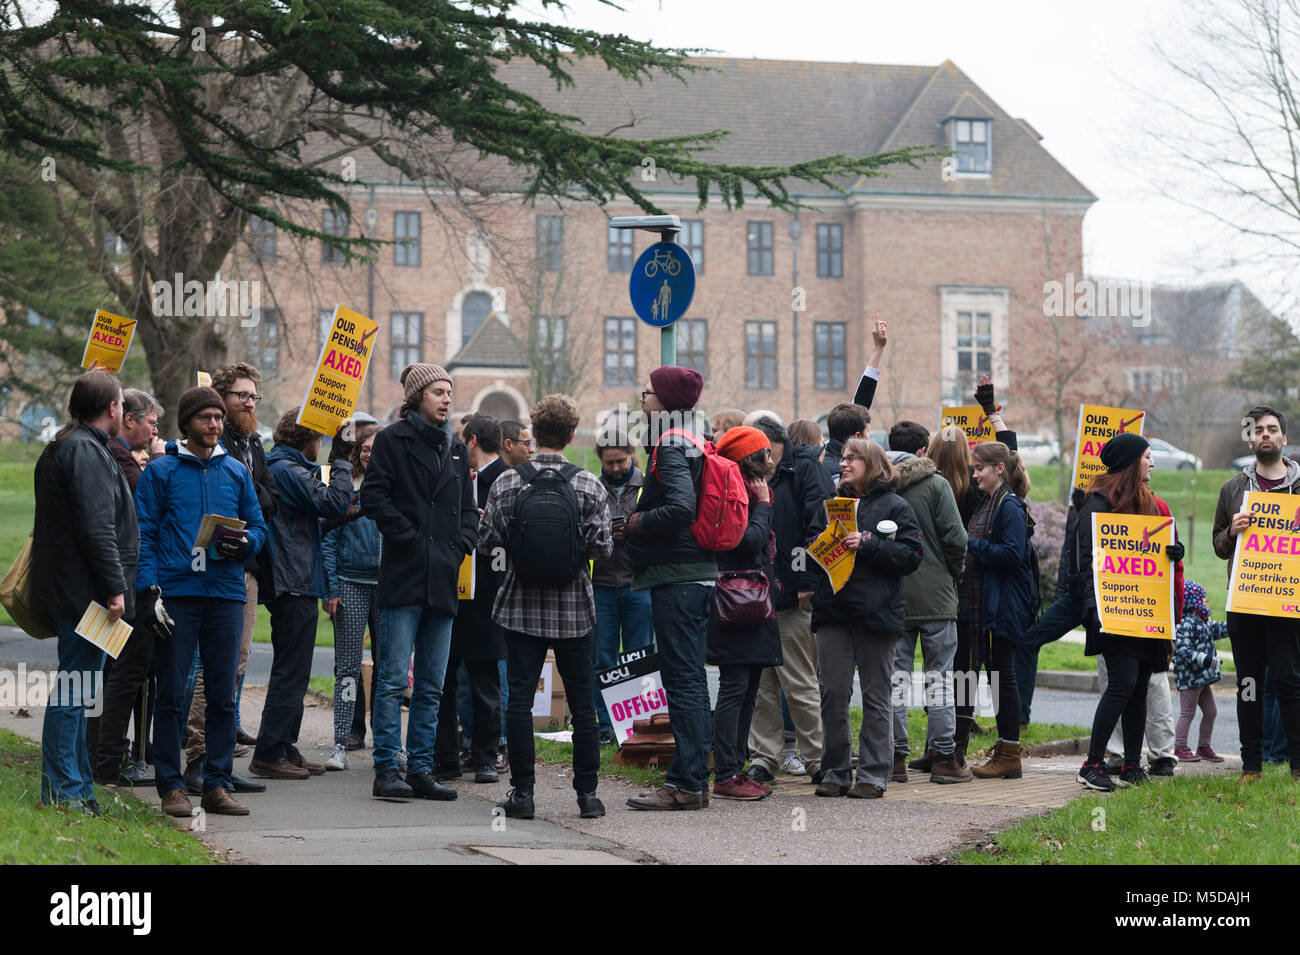 Exeter, Devon, UK. 22nd February, 2018. University teaching staff from the University and College Union (UCU) form a picket line outside the University of Exeter as they strike over pension disputes. Credit: Theo Moye/Alamy Live News Stock Photo